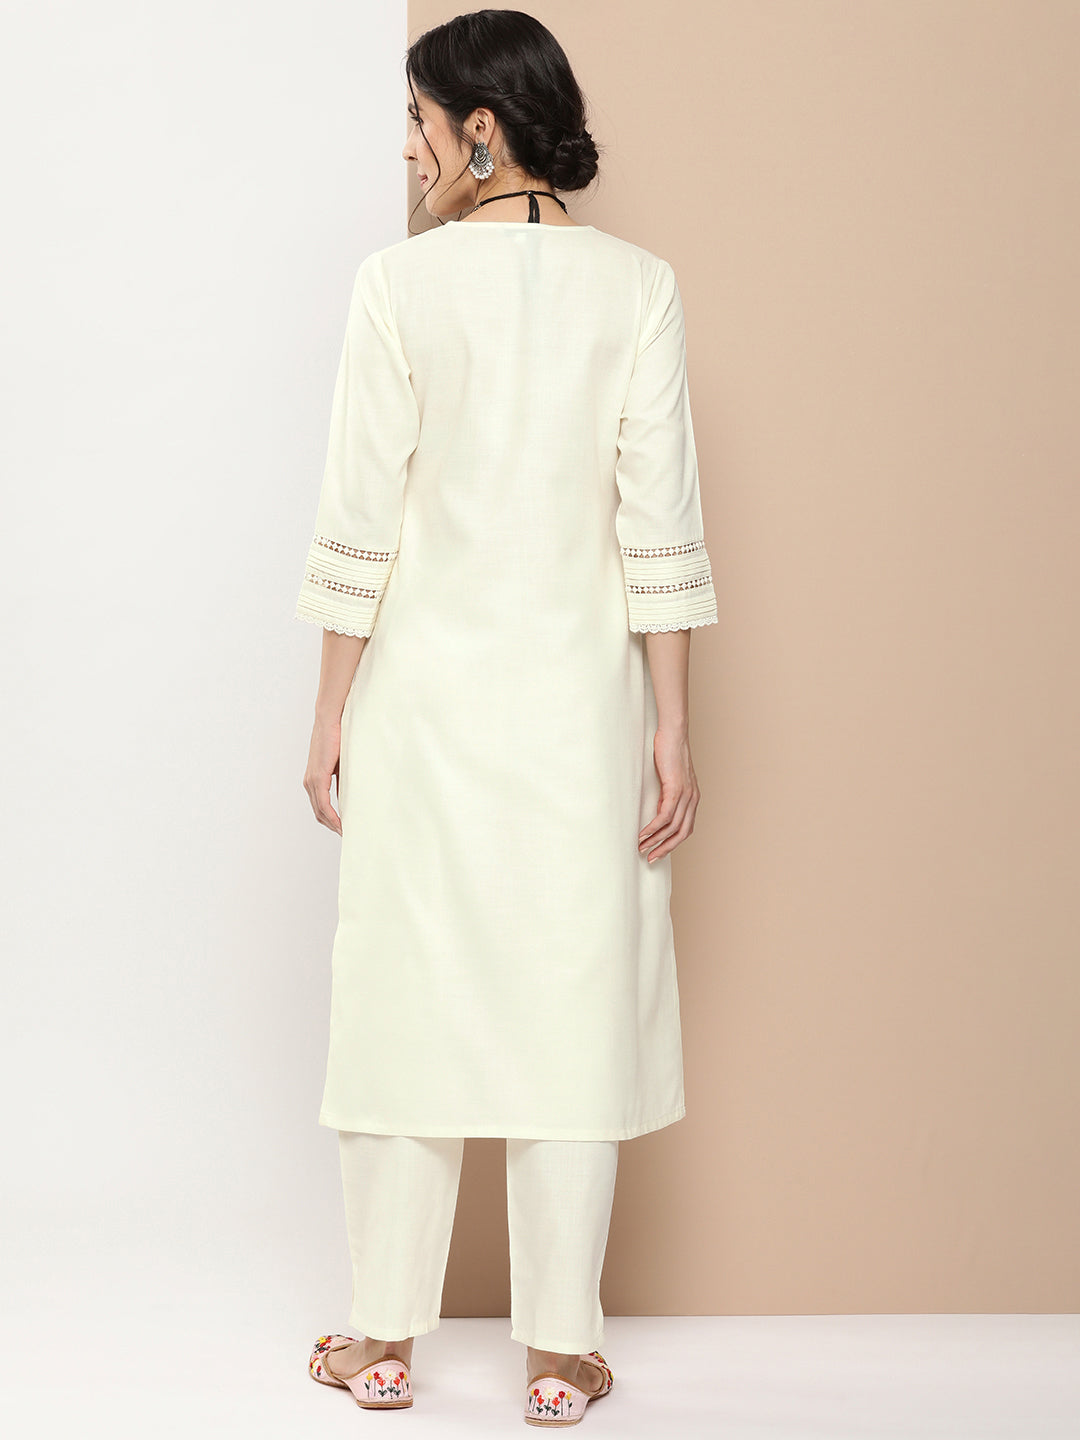 Women's Off White Embroidered Kurta With Off White Solid Palazzos - Bhama Couture